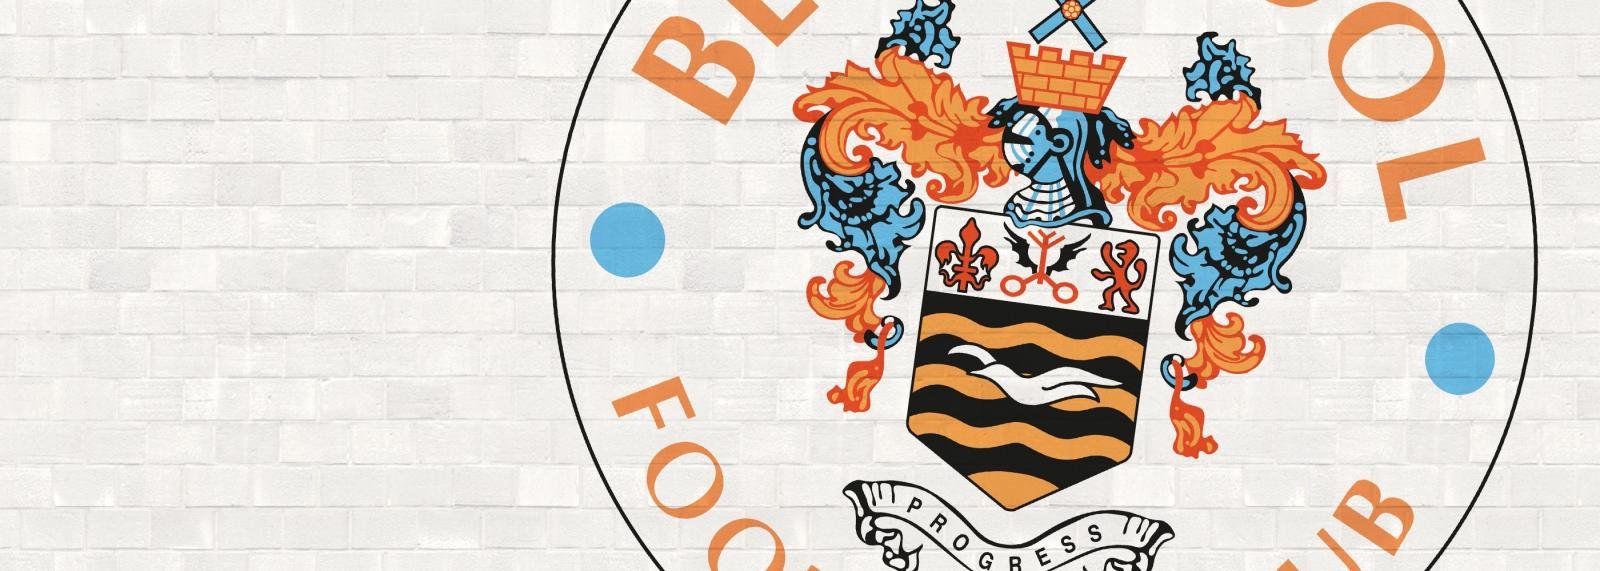 ‘Indefensible’ Blackpool lack desire, dedication and most importantly those old school heroes